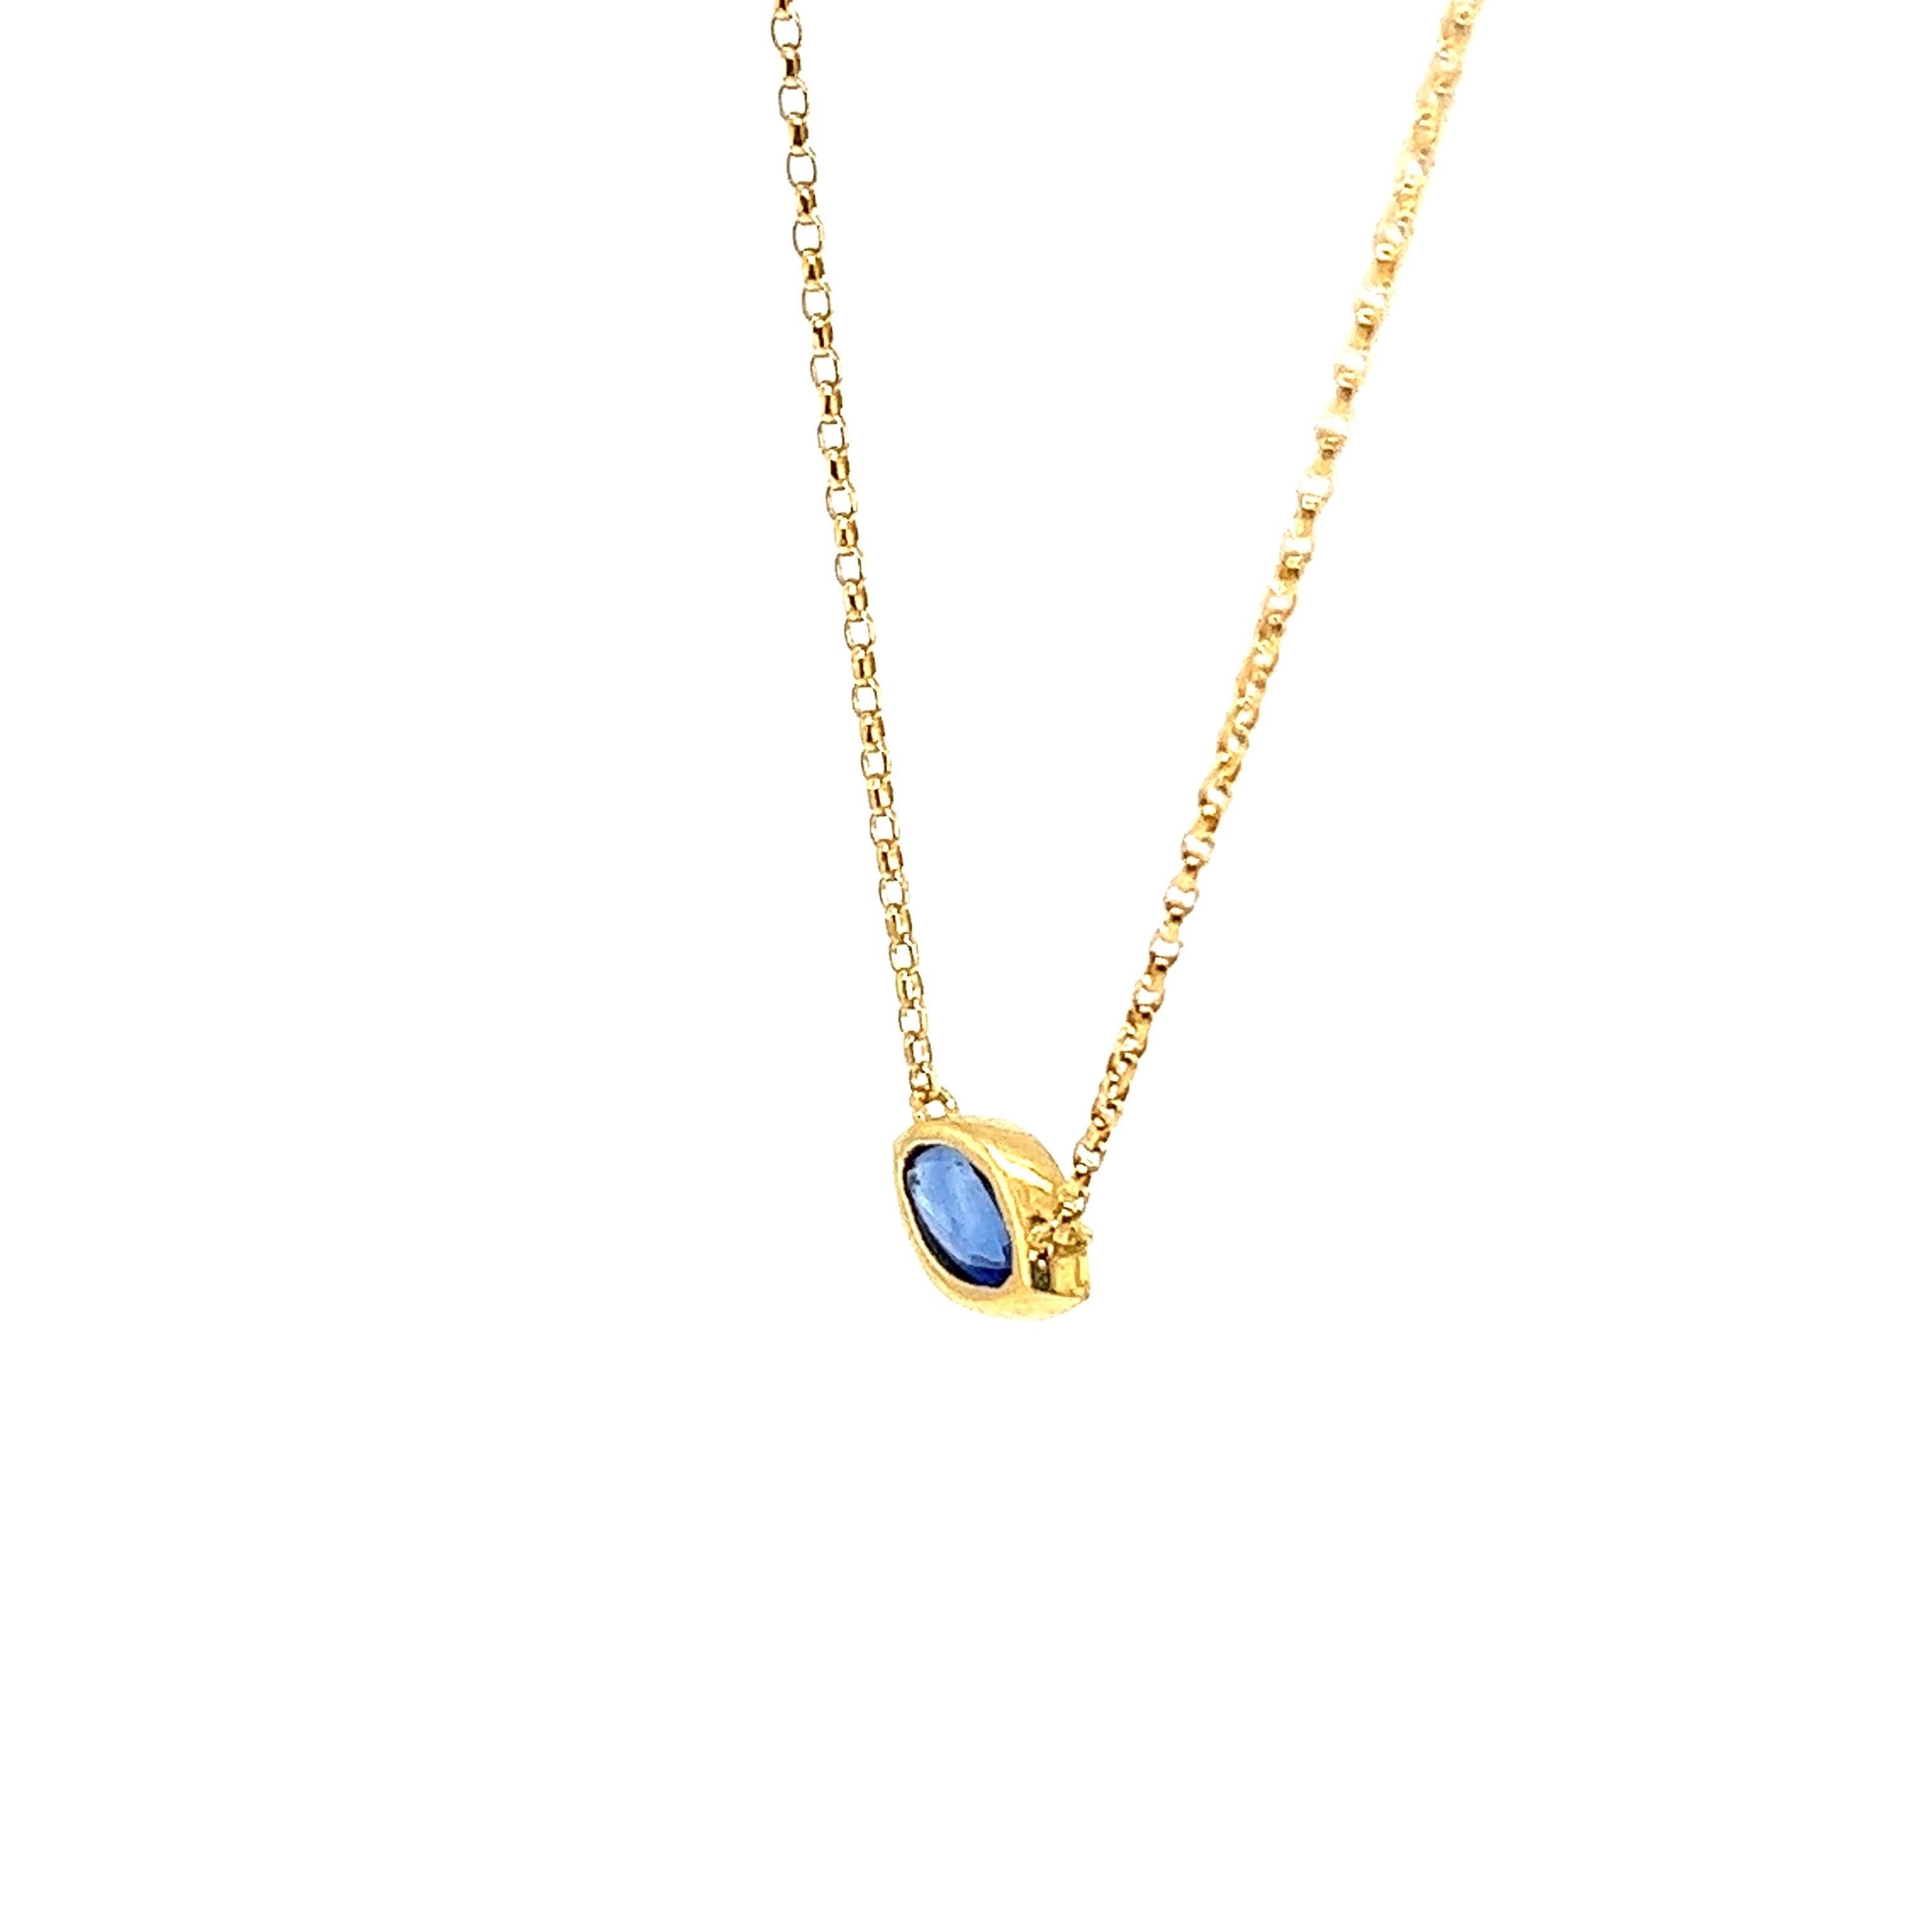 This beautiful marquise shape Sapphire is set in a classic 18ct Yellow Gold pendant setting. The marquise shape is a great alternative to the traditional round cut. It's elliptical shape gives the illusion of a larger stone. Suspended on 16